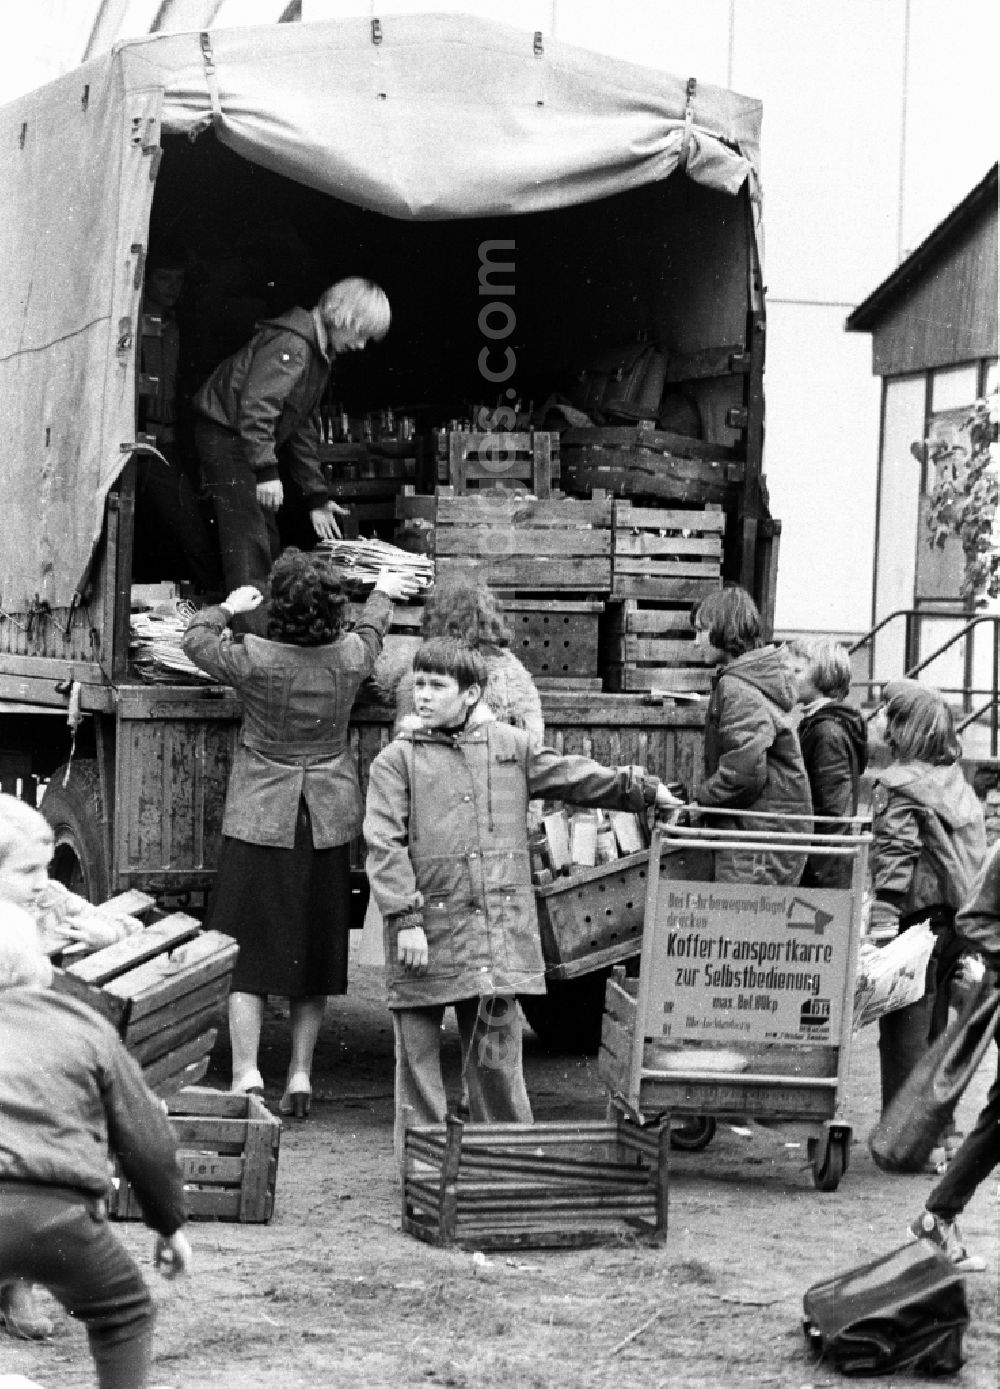 GDR photo archive: Berlin - Children and young people collecting waste materials, waste paper, bottles and gases as secondary raw materials for collection in the state-controlled SERO collection points. in Berlin Eastberlin on the territory of the former GDR, German Democratic Republic